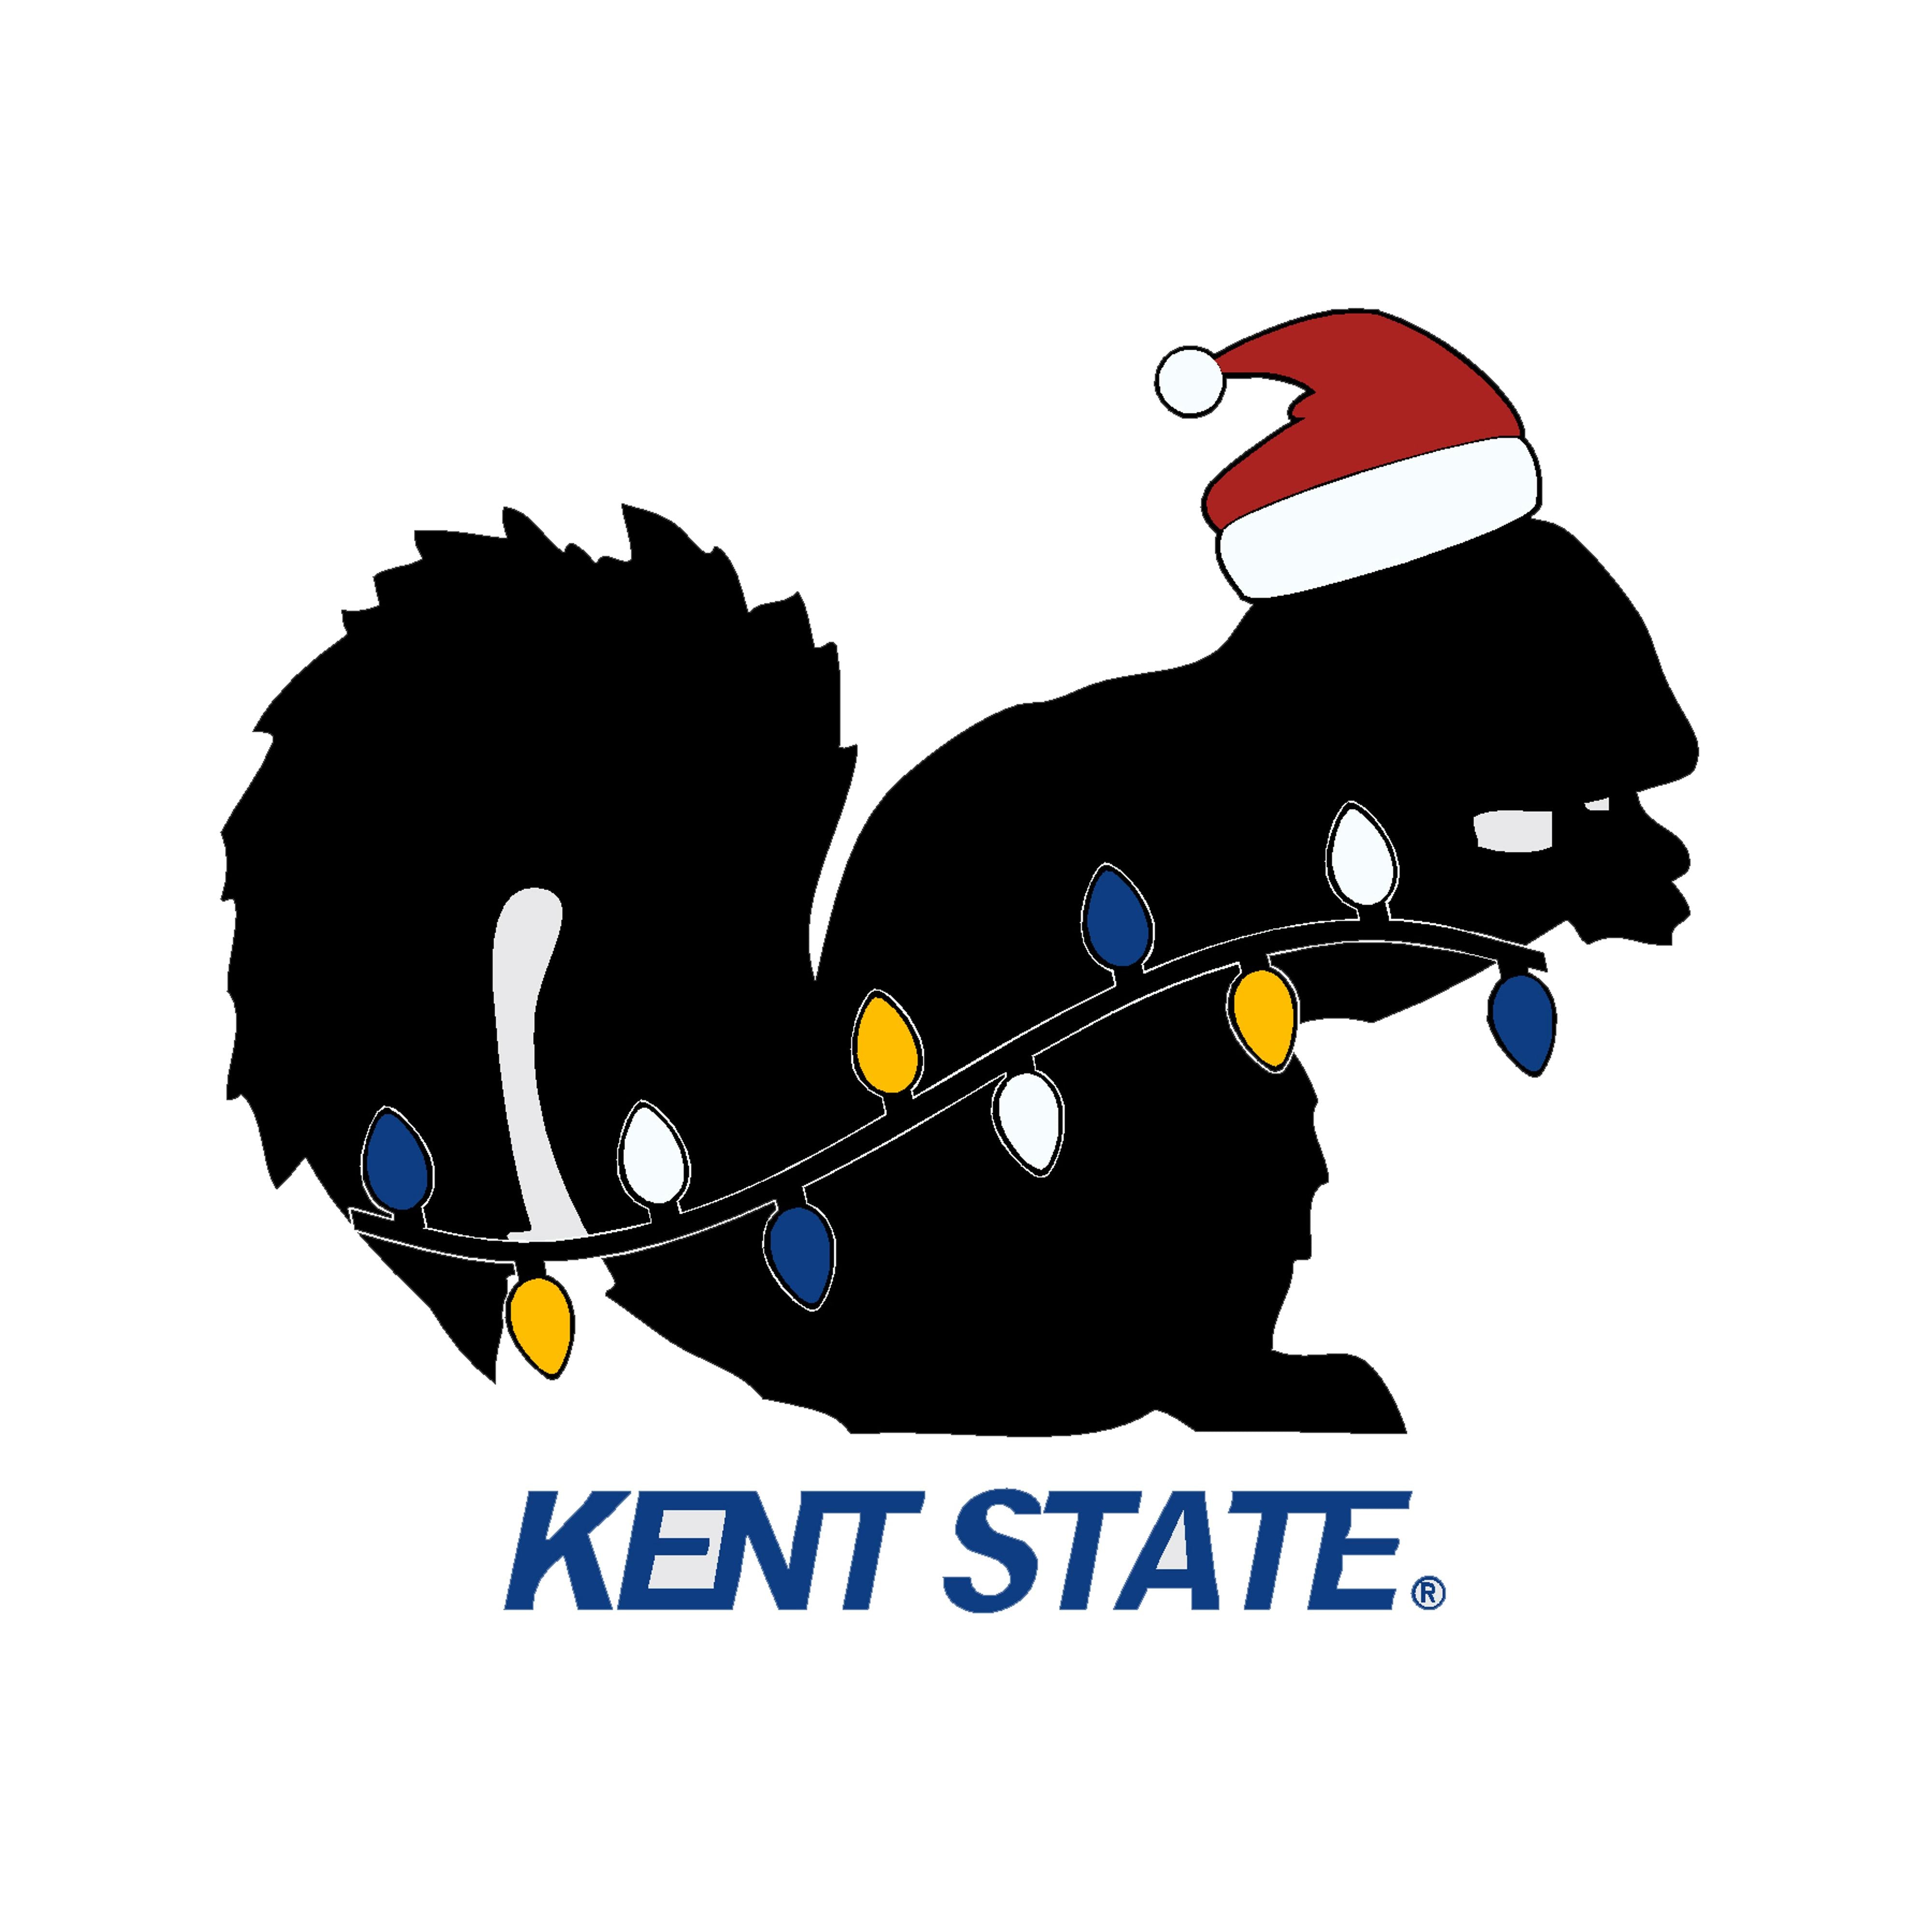 Black Christmas Squirrel Over Kent State Acrylic Ornament